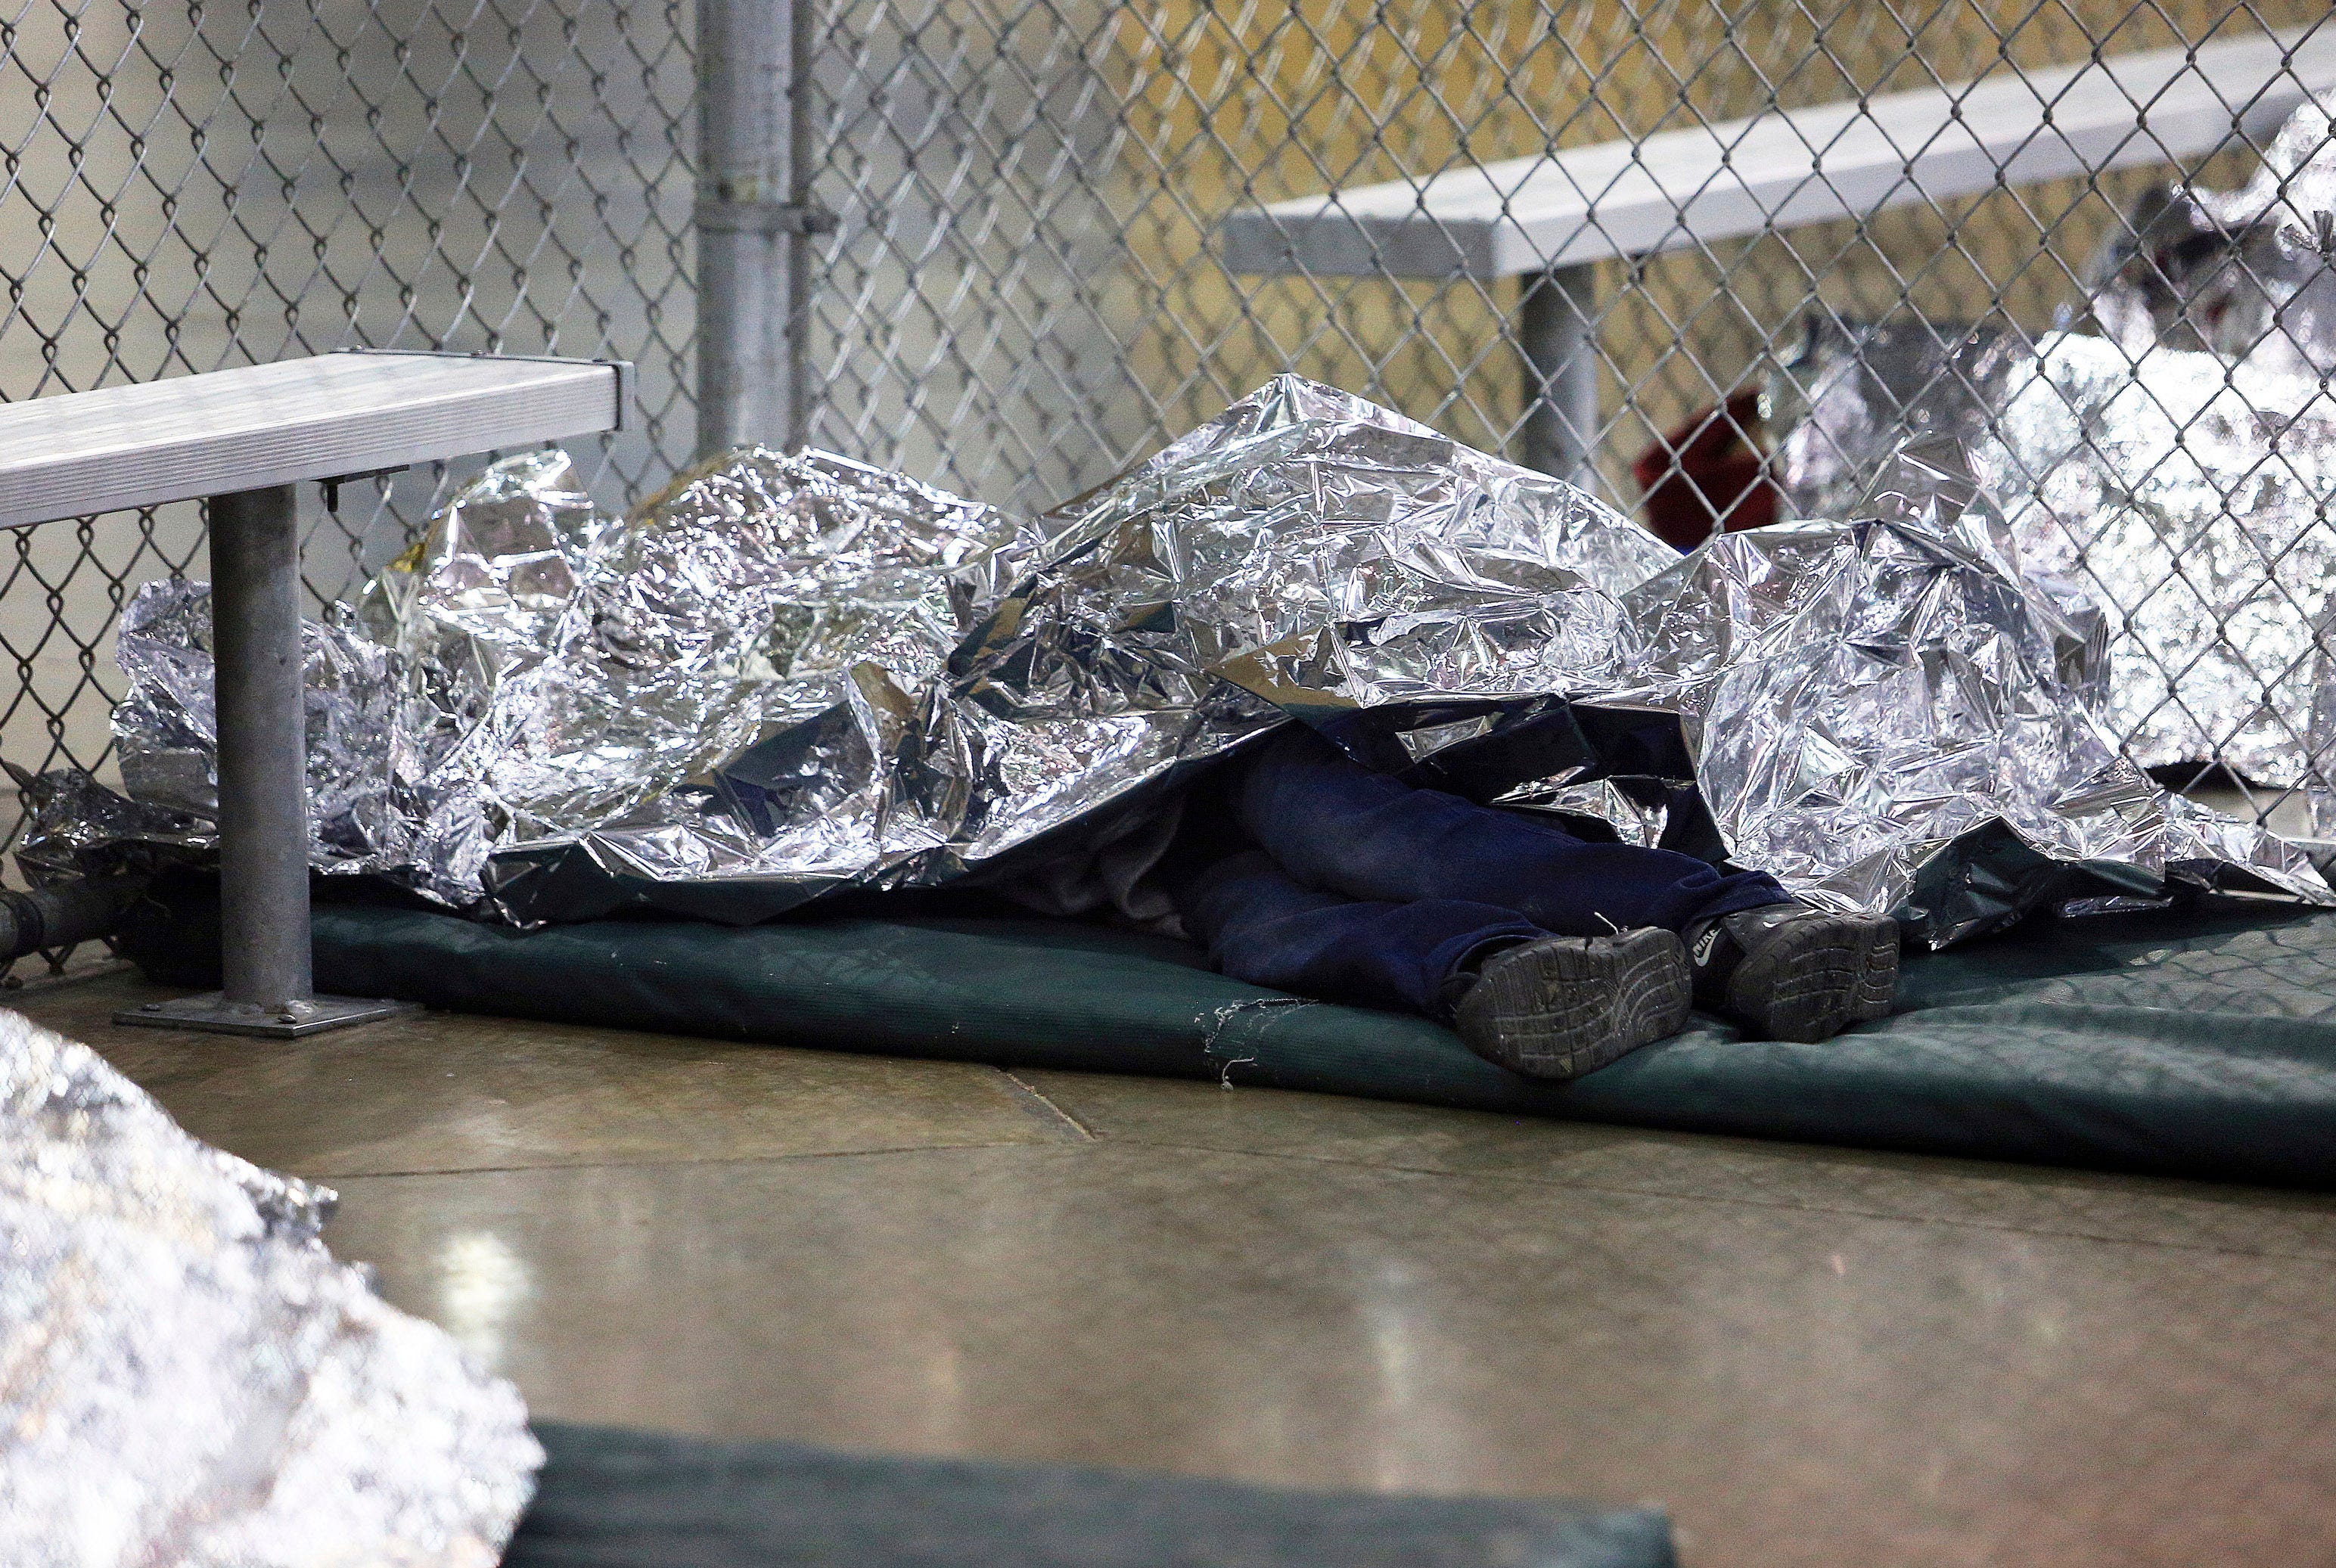 MCALLEN, TX – A detained immigrant sleeps under mylar blankets inside a holding cell at the Border Patrol's processing center in McAllen, Texas on Aug. 12, 2019.